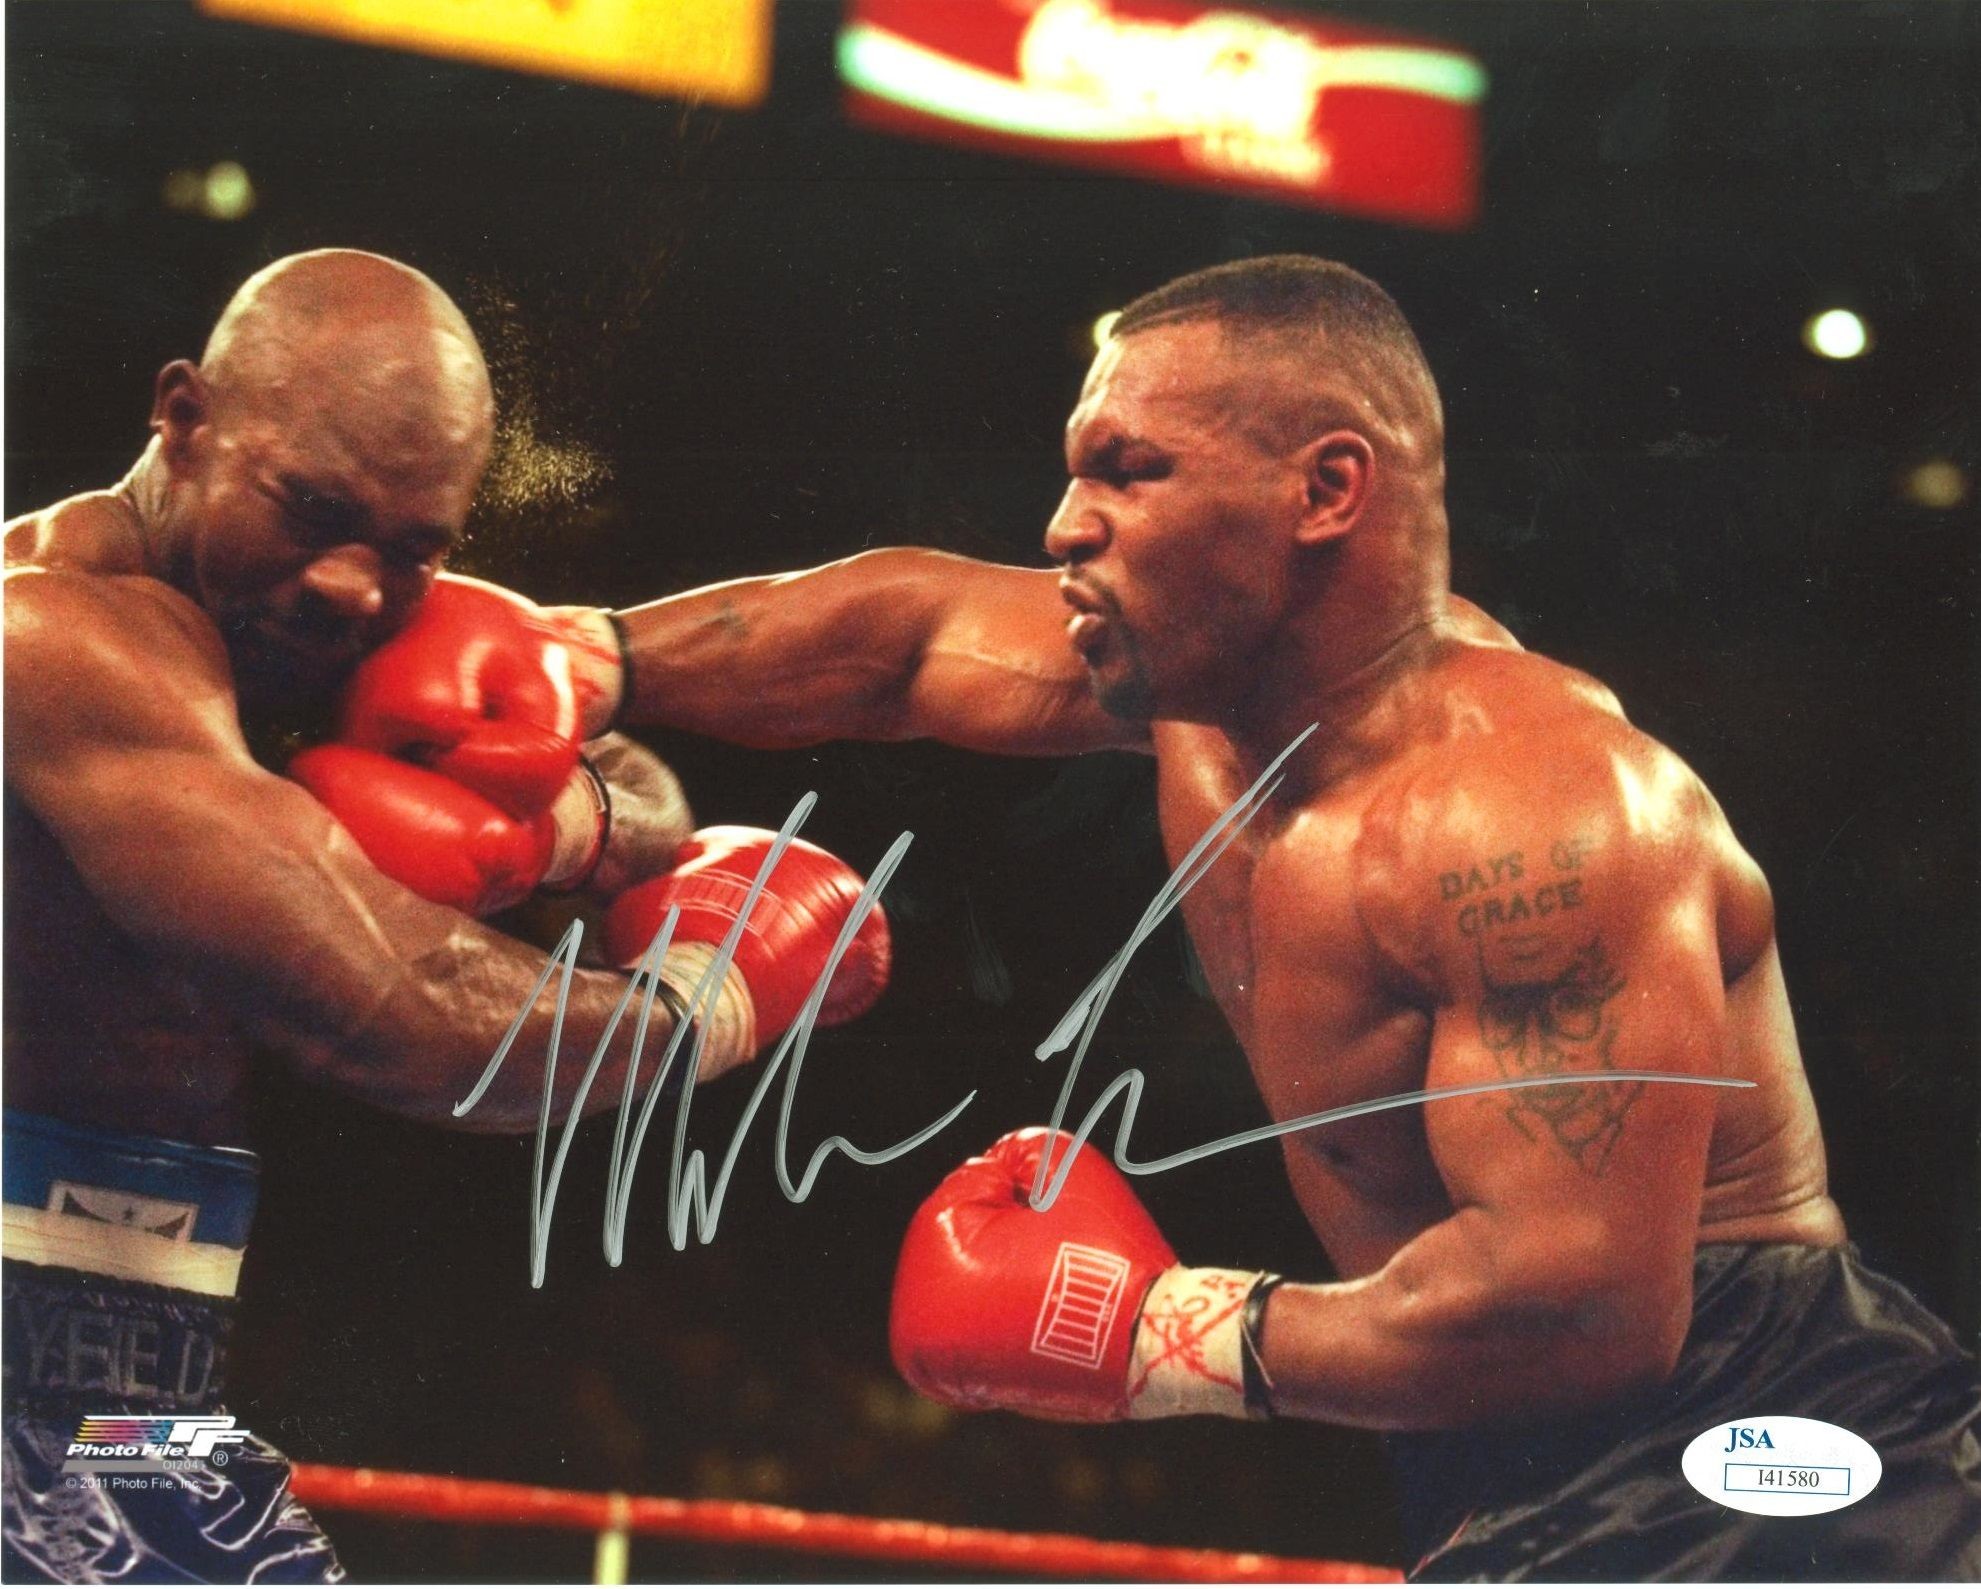 V.815: Mike Tyson Wallpapers, HD Images of Mike Tyson .